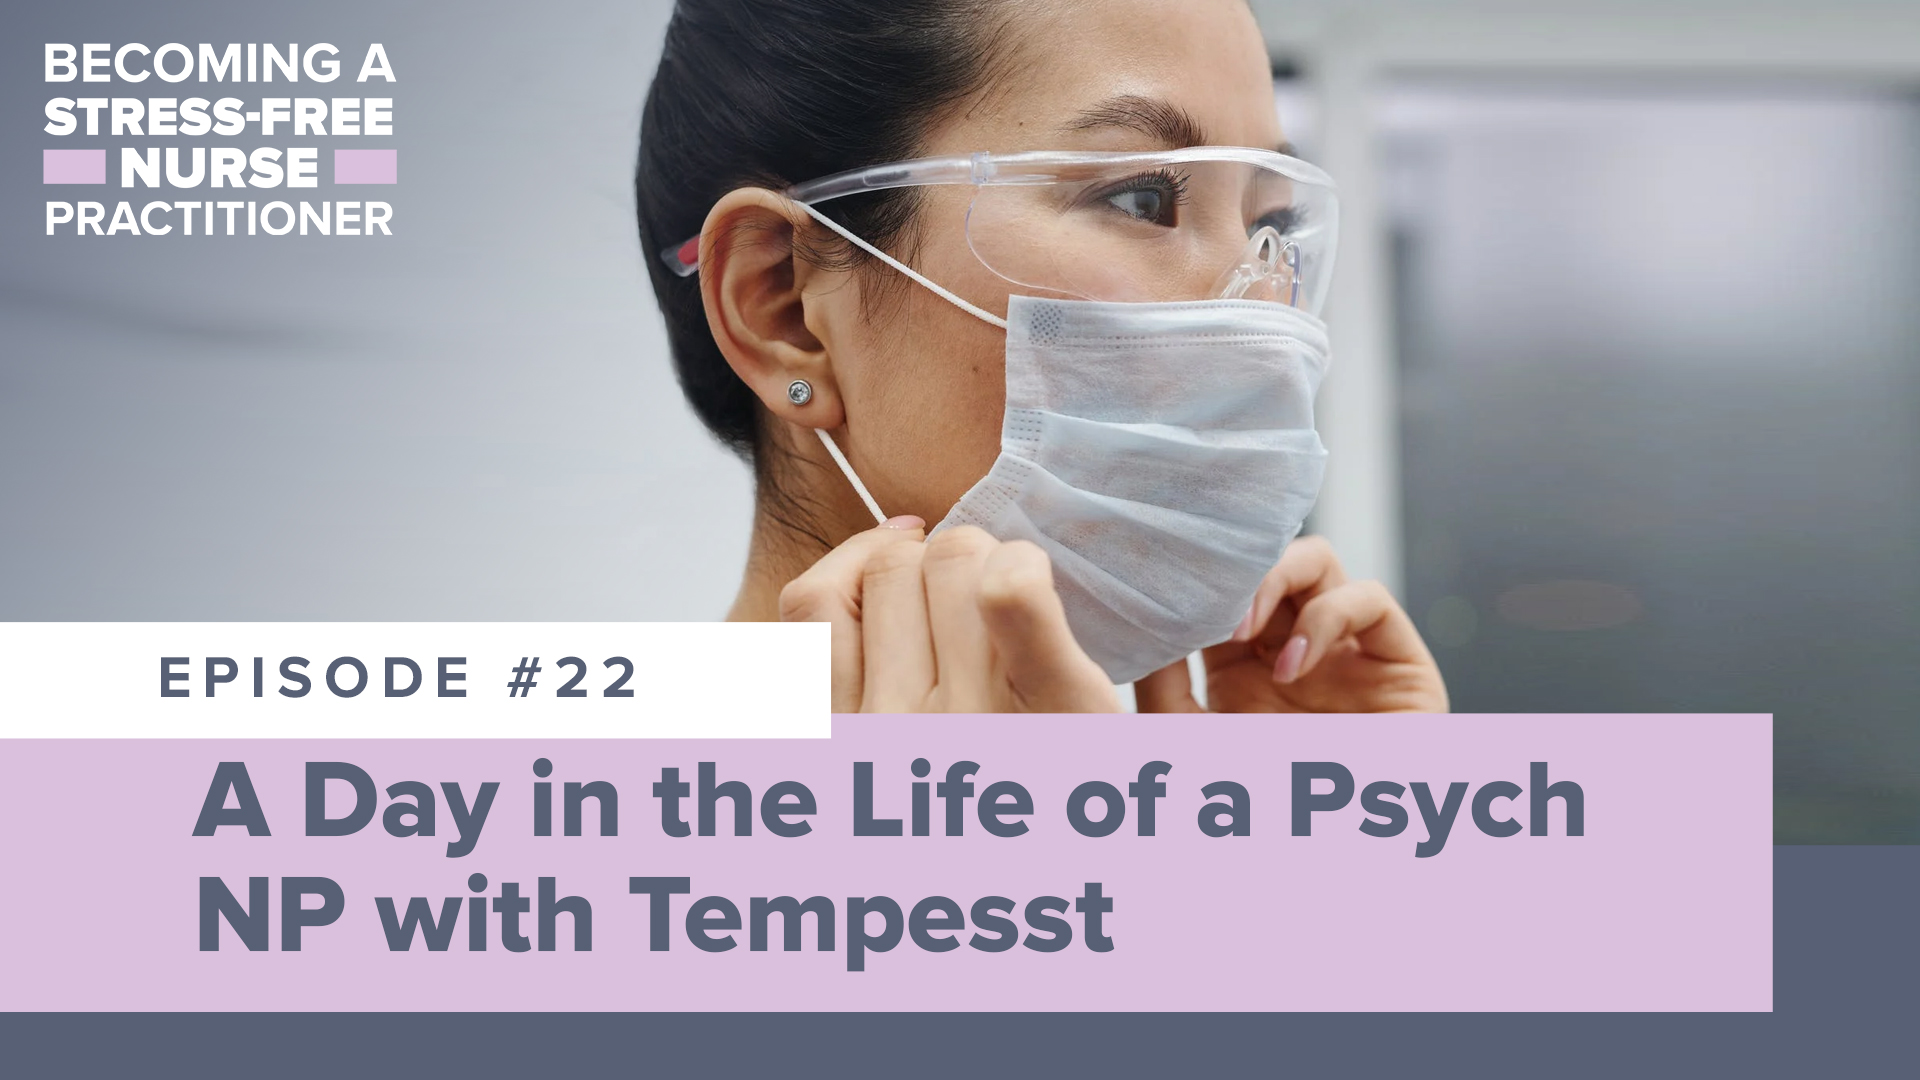 SMNP Blog - Ep #22: A Day in the Life of a Psych NP with Tempesst